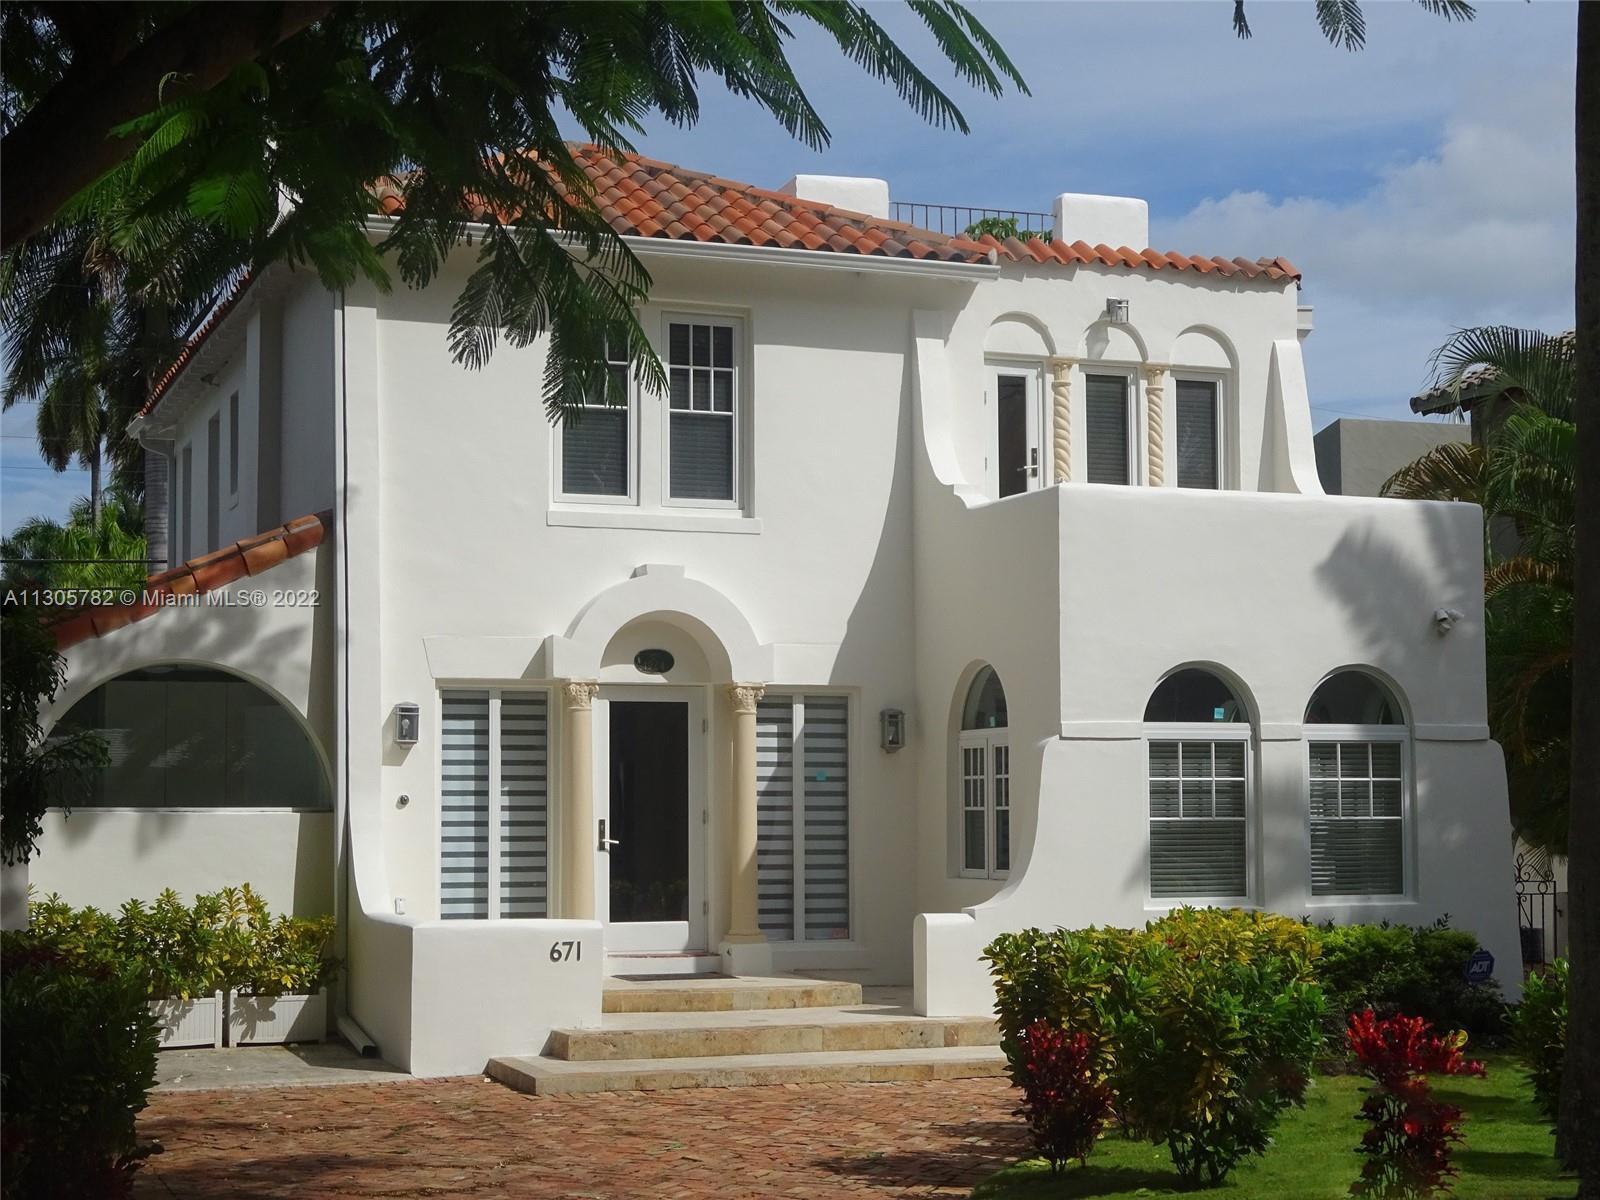 Stunning Morningside Historic District Old Spanish / Mediterranean Beauty!  Immaculate 4/3.5 complet